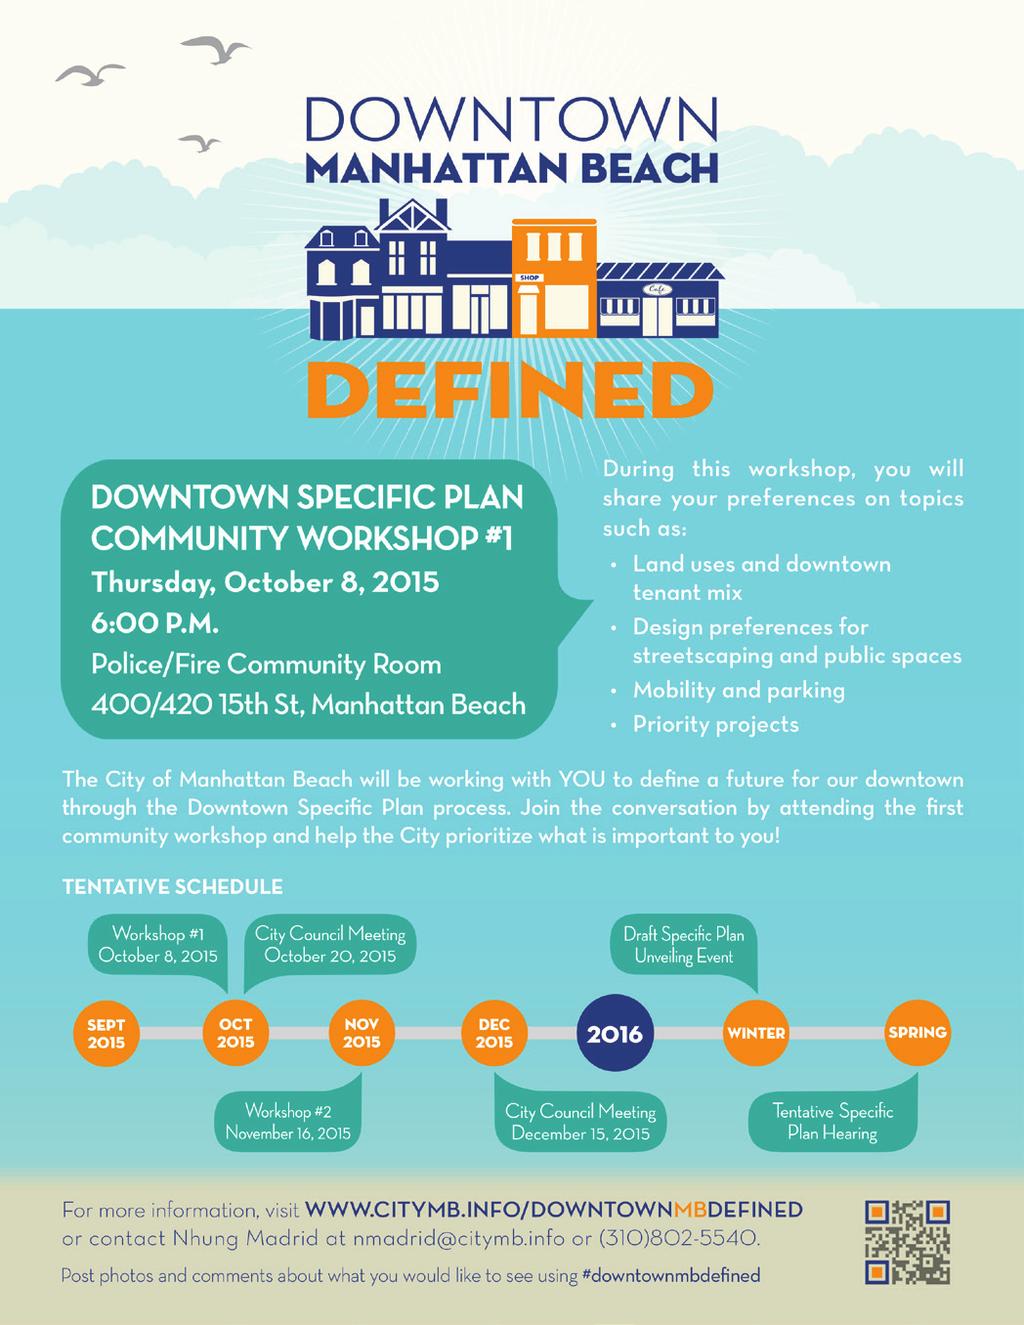 7 PLANNING PROCESS AND OUTREACH To prepare the Downtown Specific Plan, the City of Manhattan Beach utilized a community-based planning